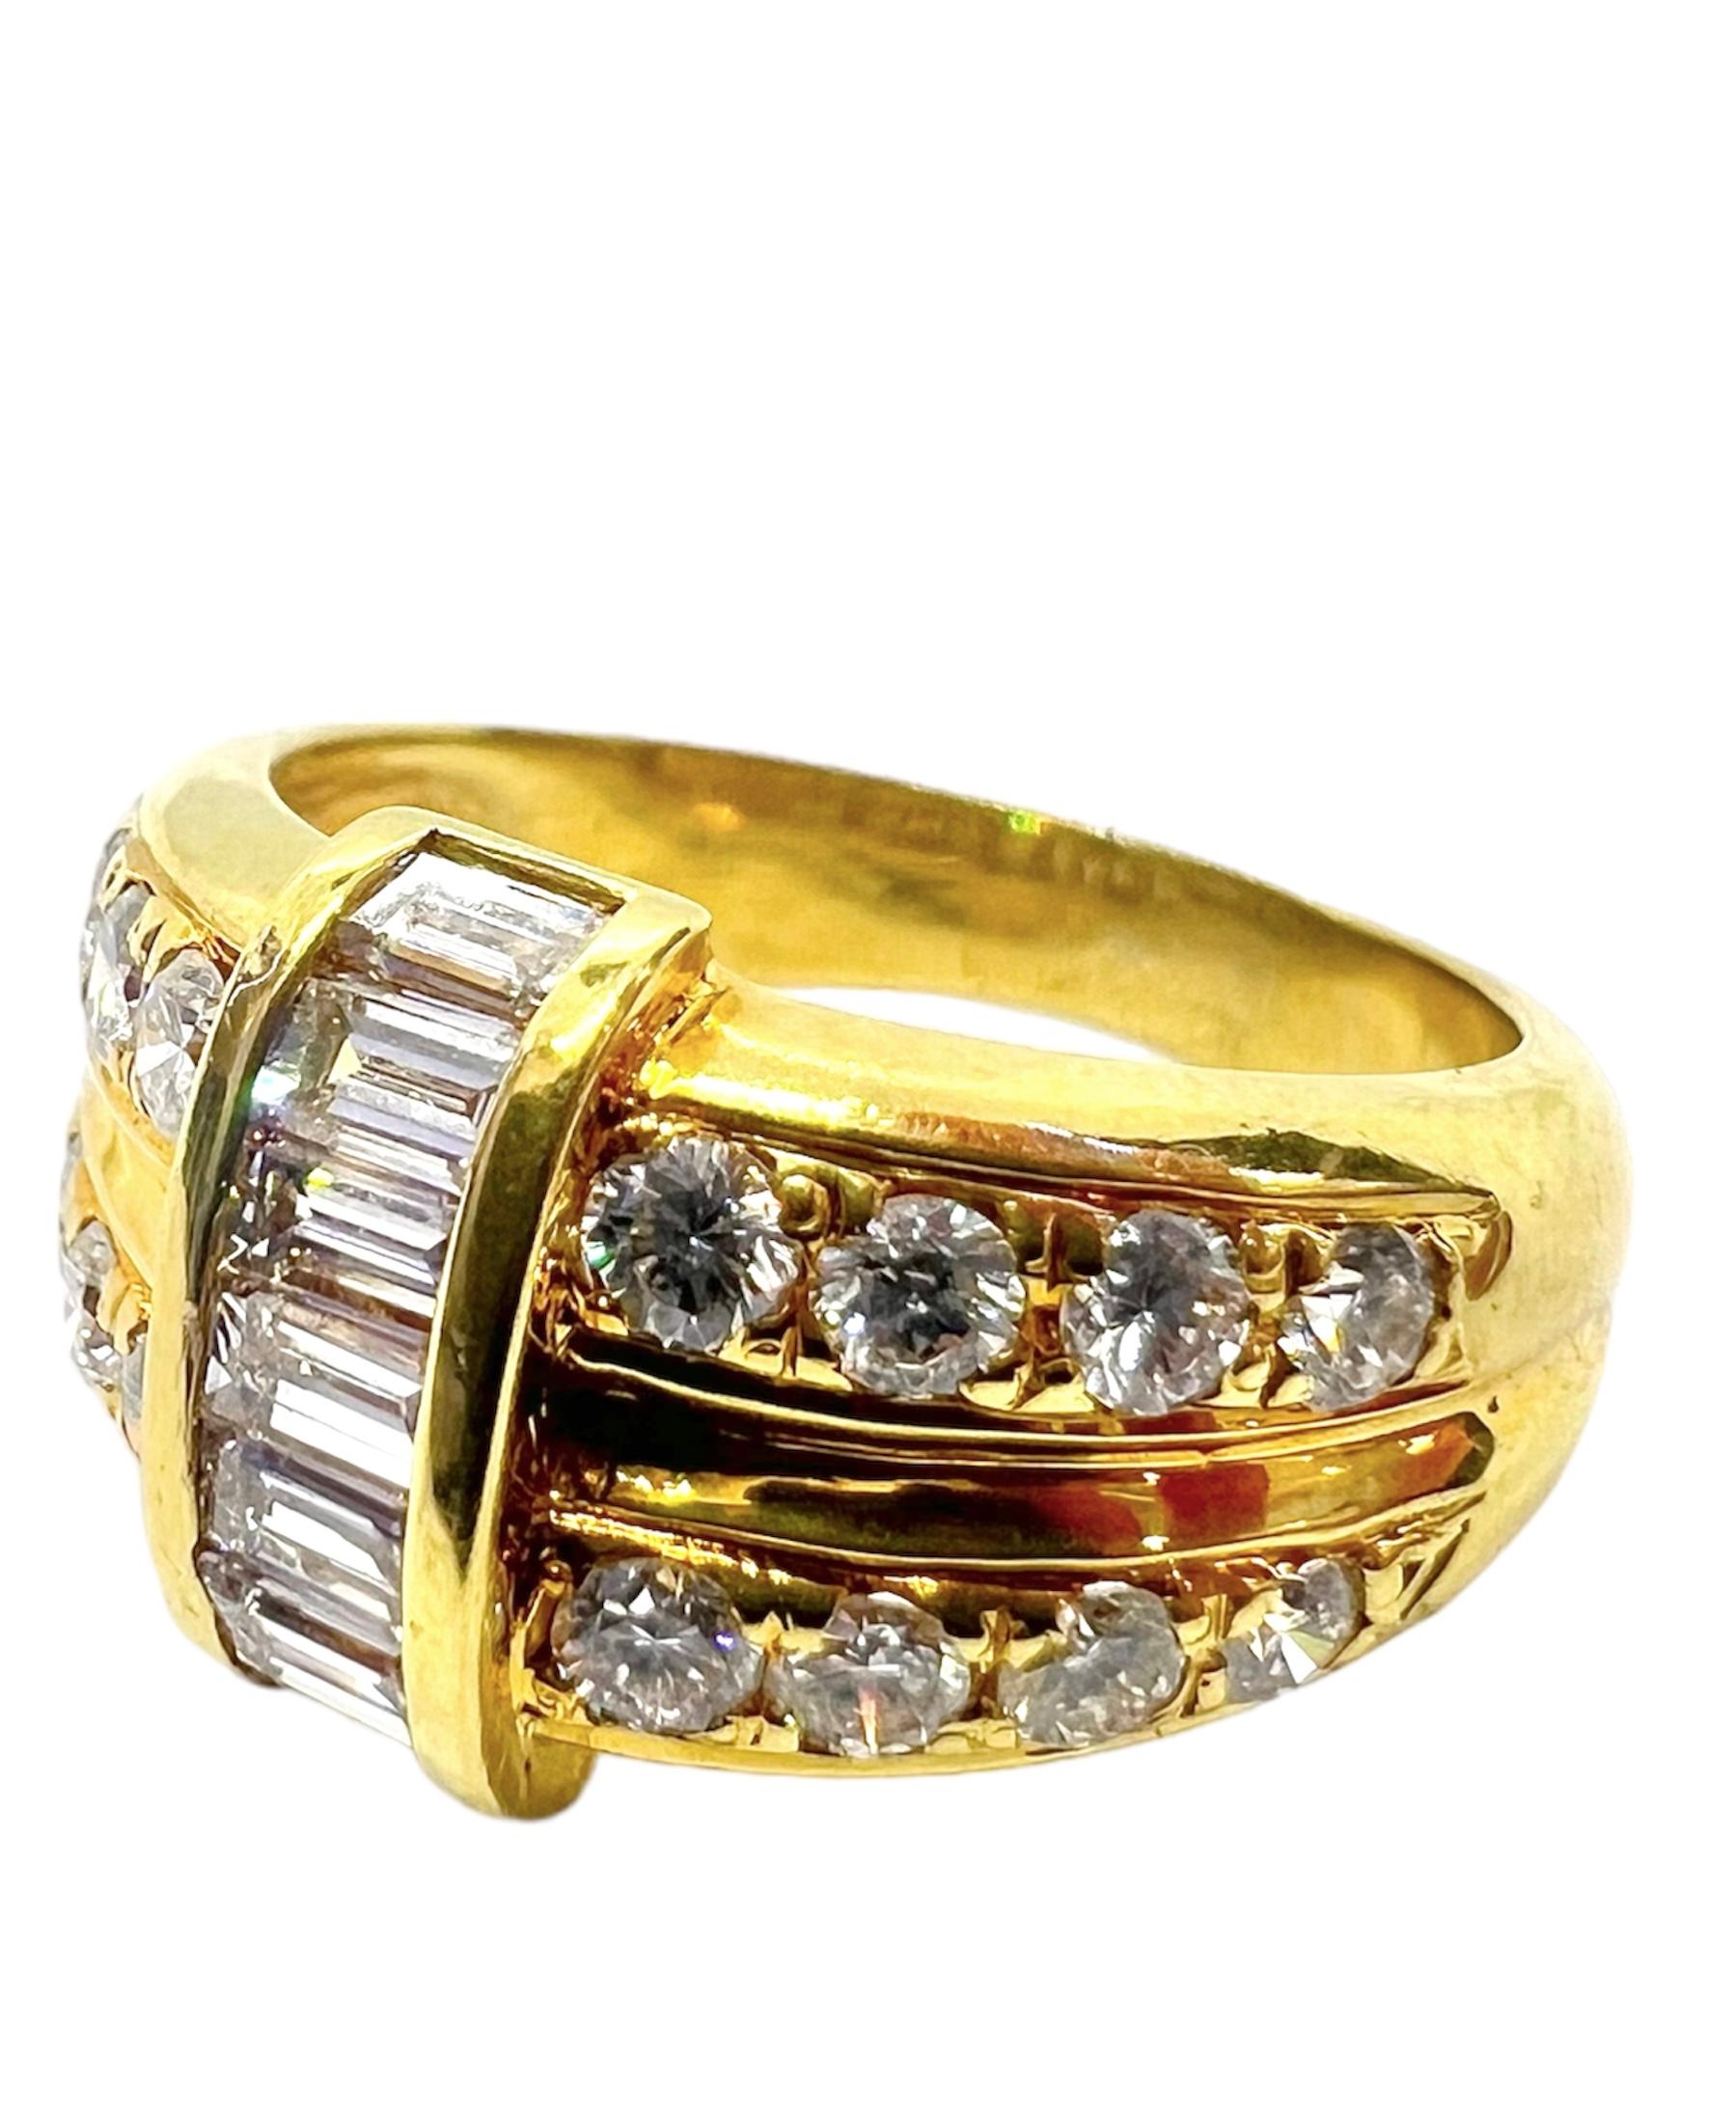 18K yellow gold ring with small round diamonds and baguette cut diamonds.

Sophia D by Joseph Dardashti LTD has been known worldwide for 35 years and are inspired by classic Art Deco design that merges with modern manufacturing techniques.  